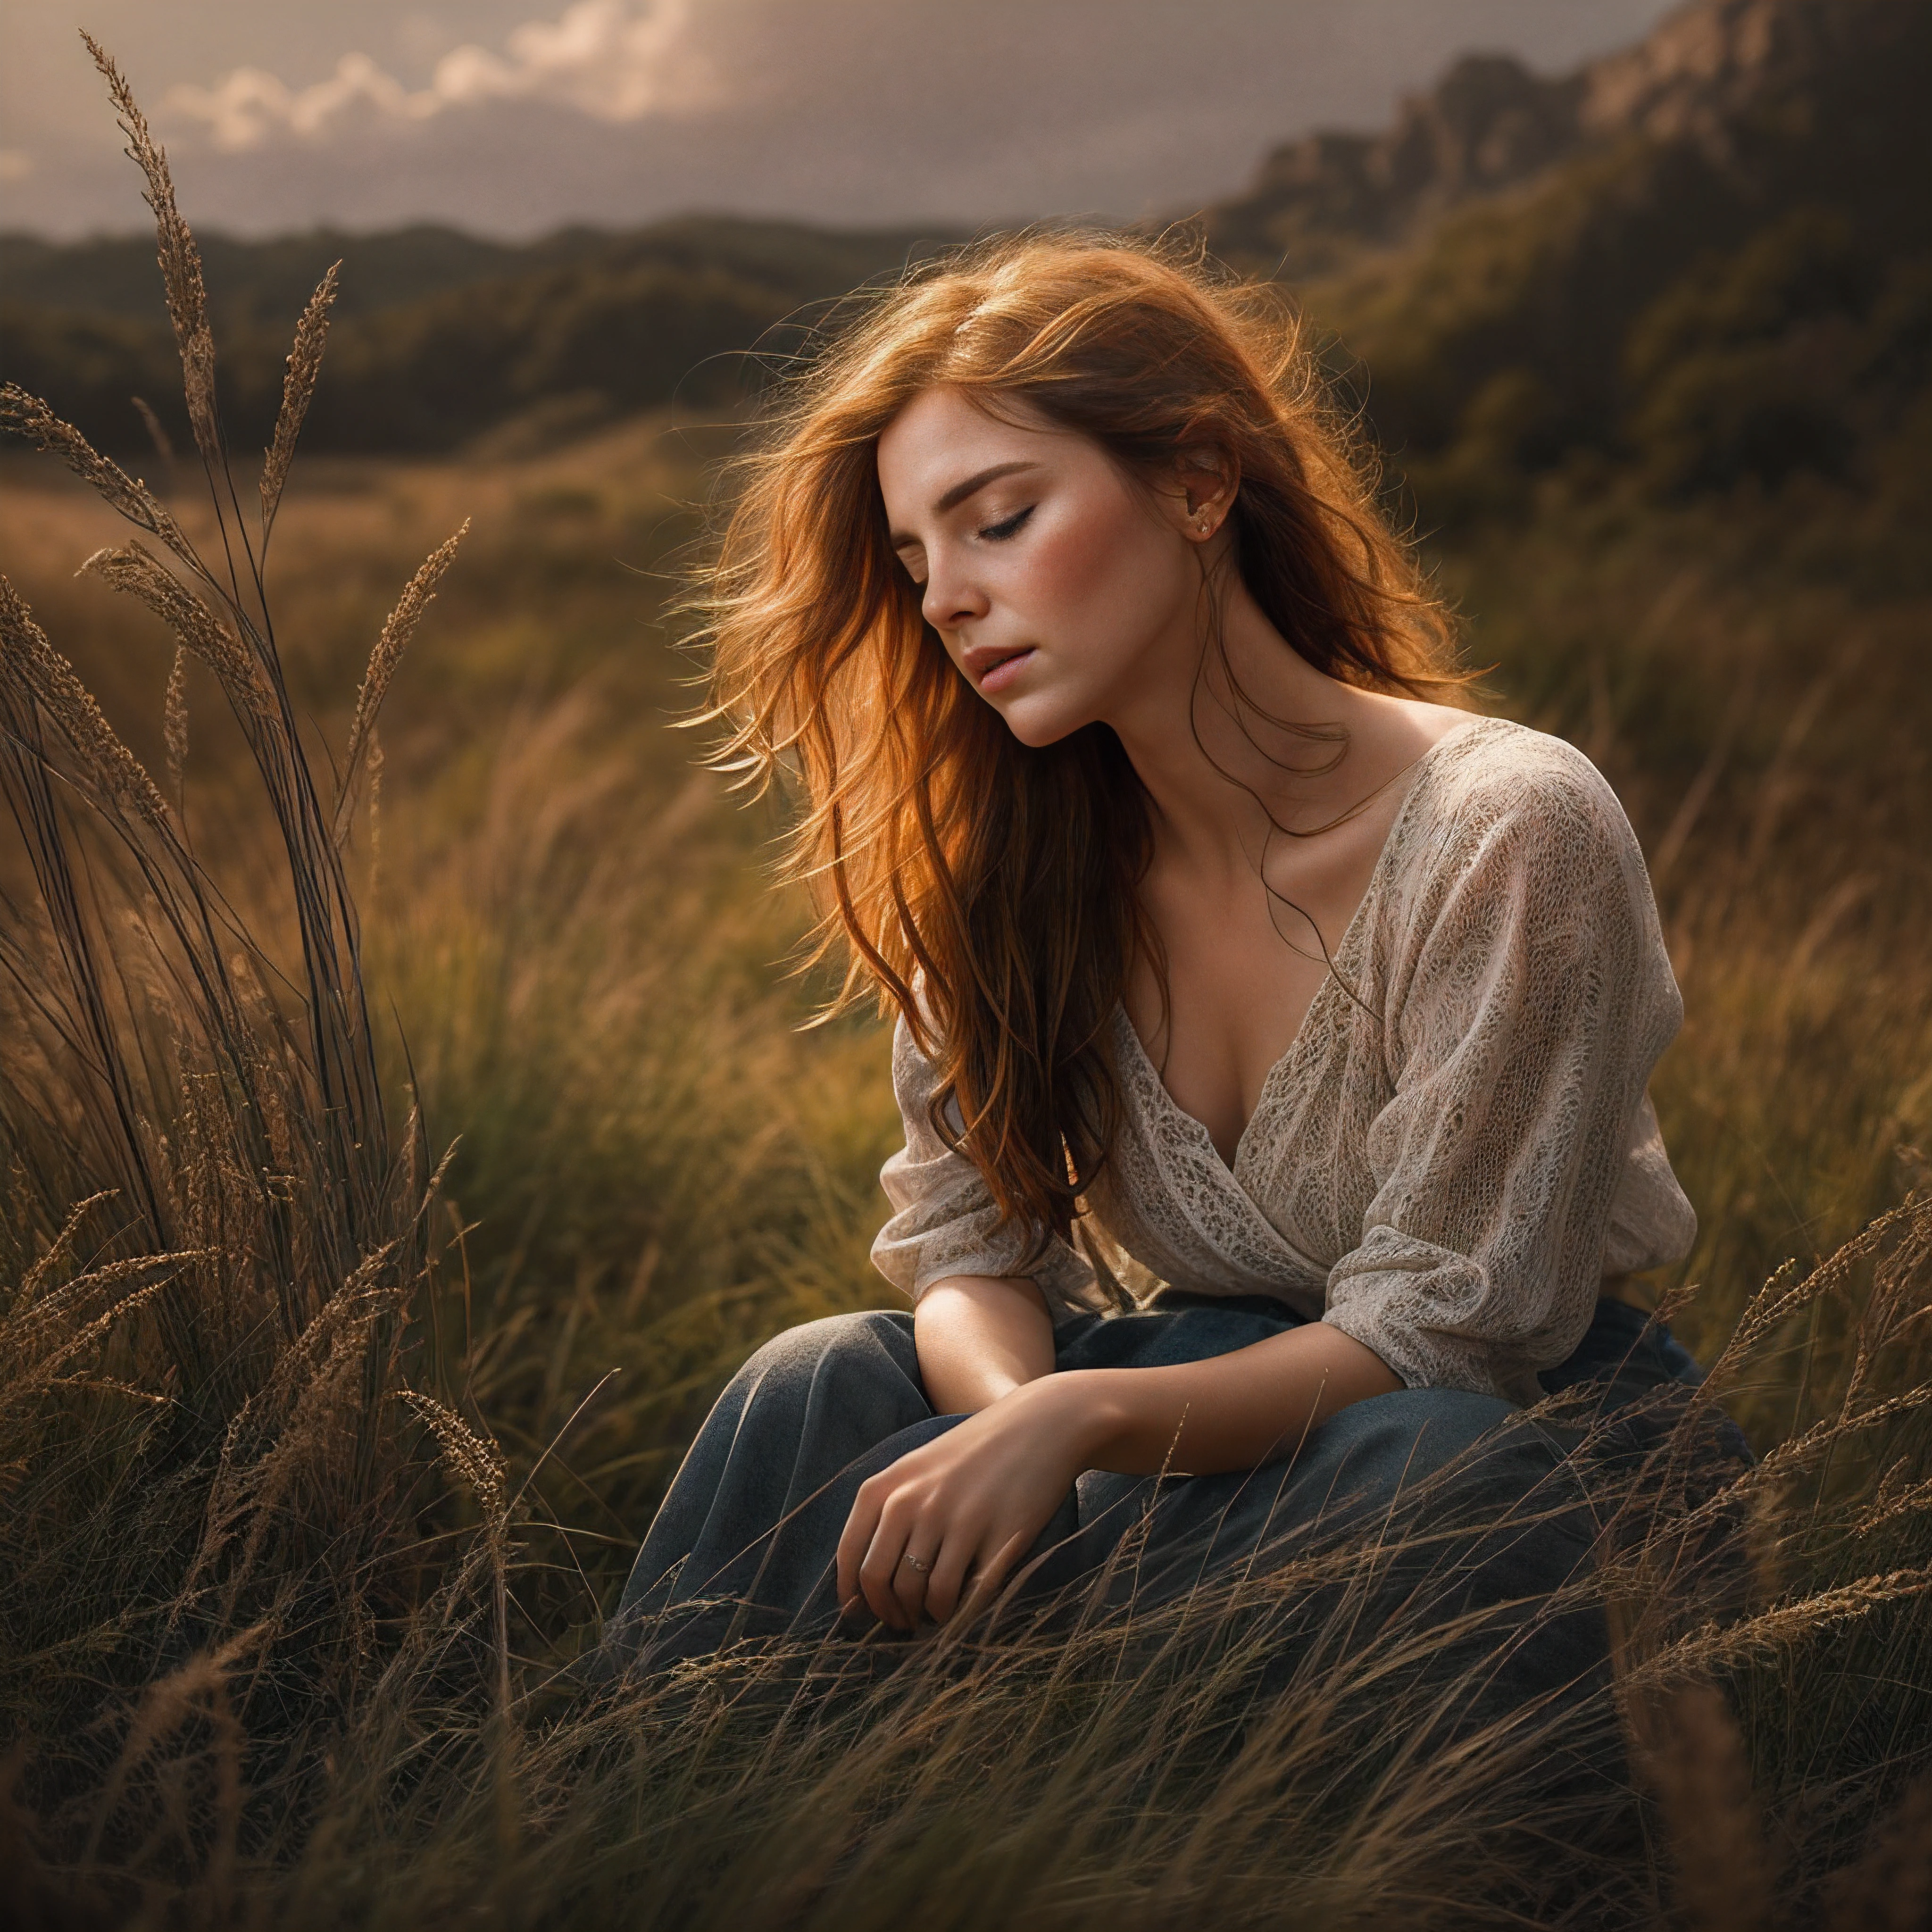 An exquisite portrait depicting a beautiful redheaded woman kneeling peacefully in a lush meadow, eyes closed in pensive thought, delicate features caressed by rays of sunlight, flawless skin adorned with endearing freckles, fiery locks softly blowing in the breeze, masterfully composed in the style of a fine art photographic print, tonality rich and atmospherically moody like a cinematic still, intricate textures and film grain integrated seamlessly, overall craftsmanship superbly executed with extraordinary attention to detail, this profound digital painting epitomizes photorealism meets imaginative artistry.